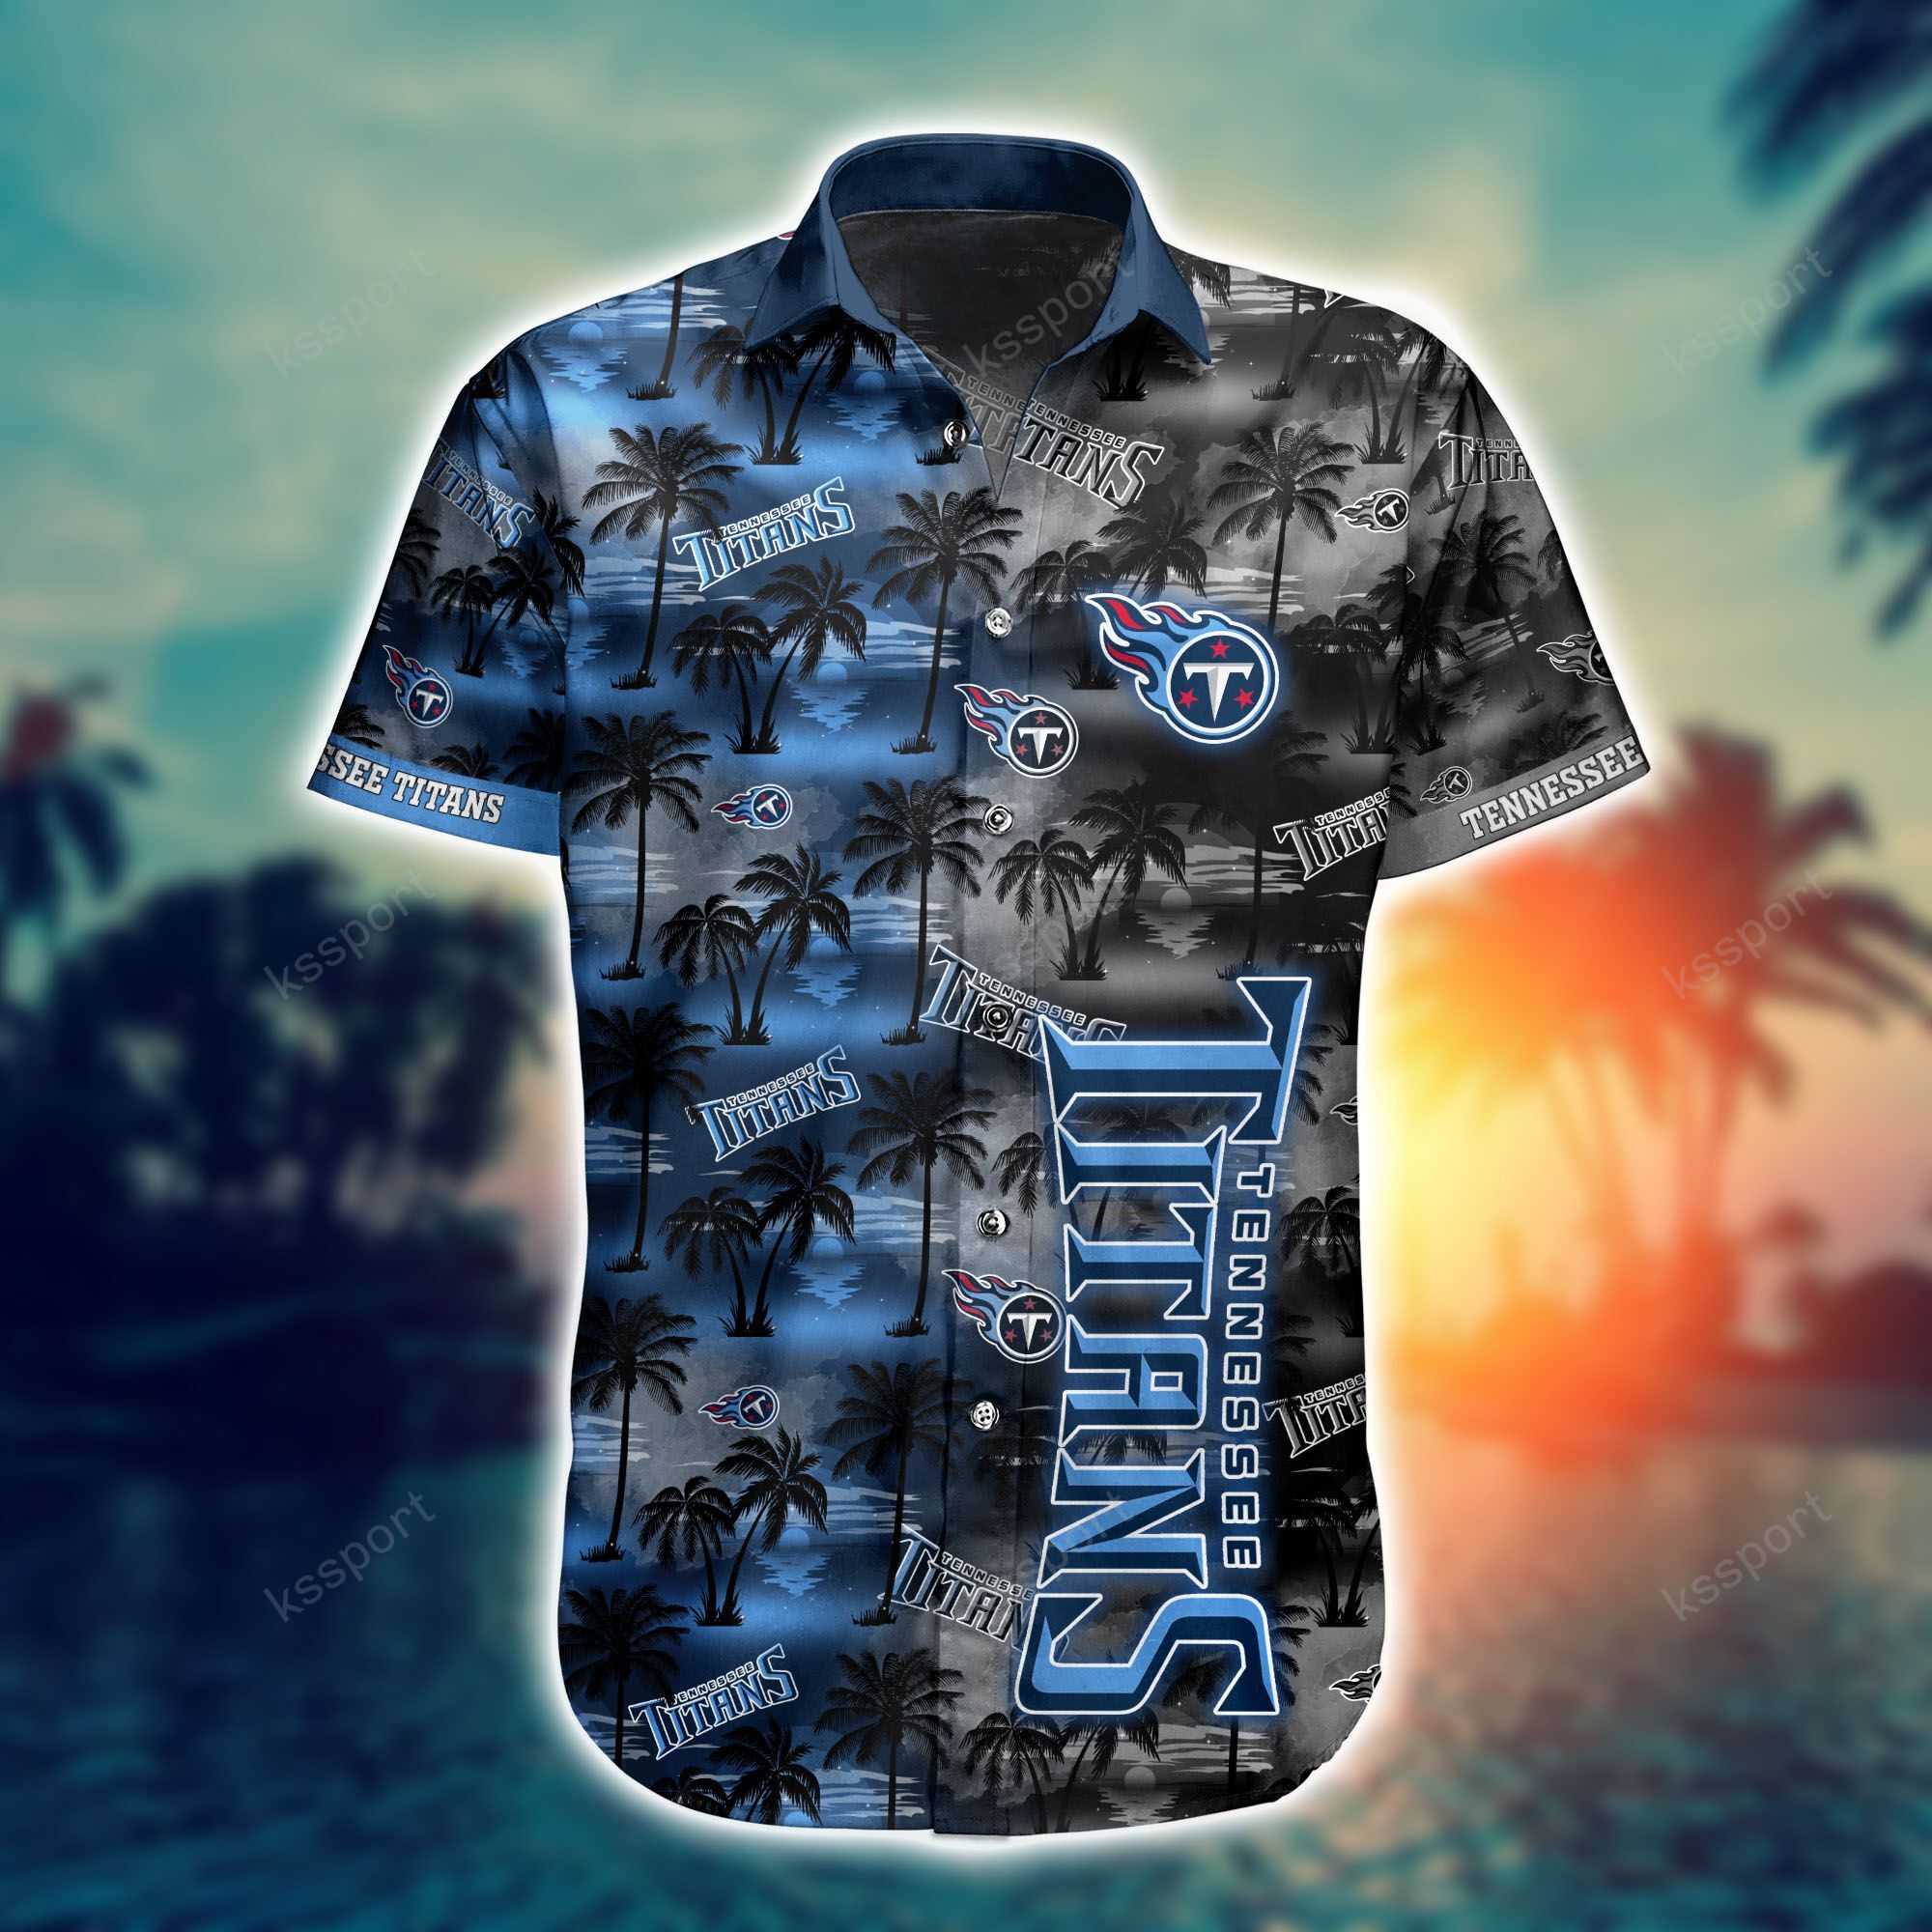 Top cool Hawaiian shirt 2022 - Make sure you get yours today before they run out! 192